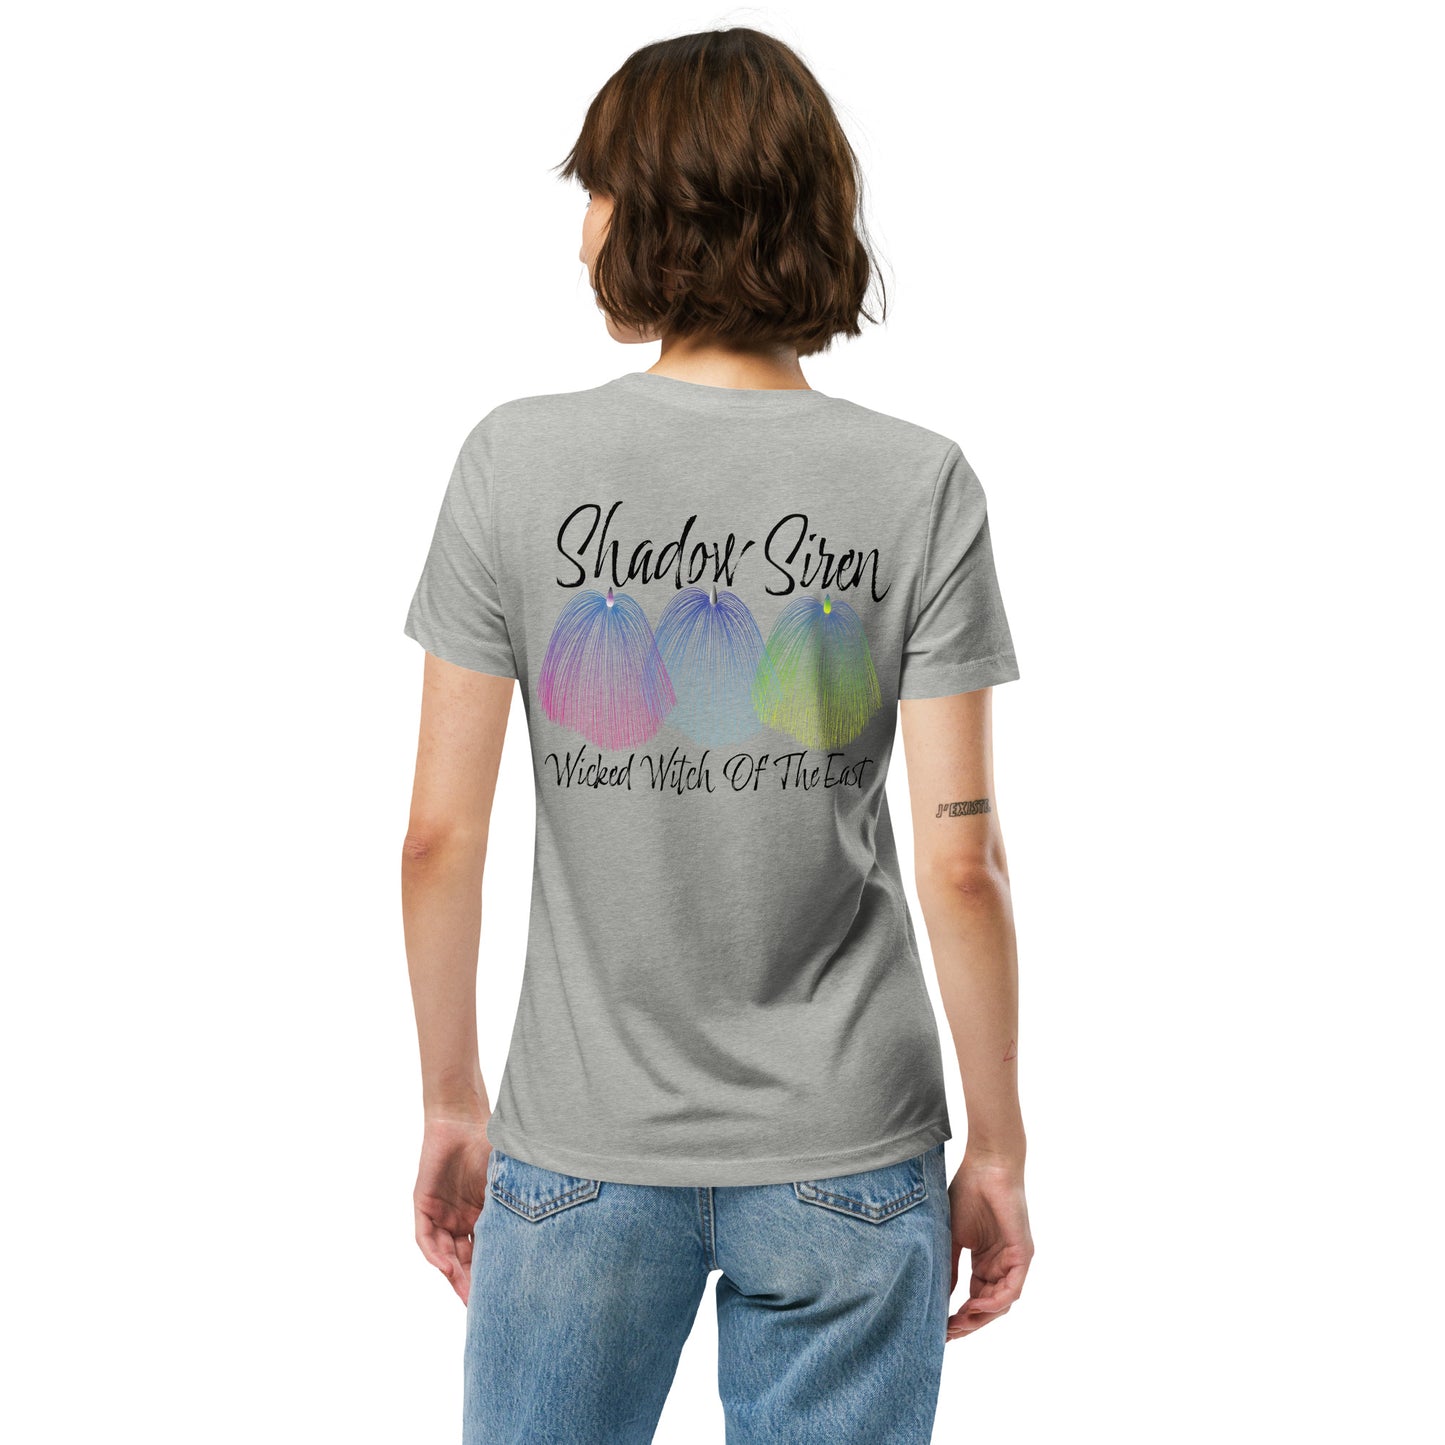 Wicked Witch of the East Women’s relaxed tri-blend t-shirt